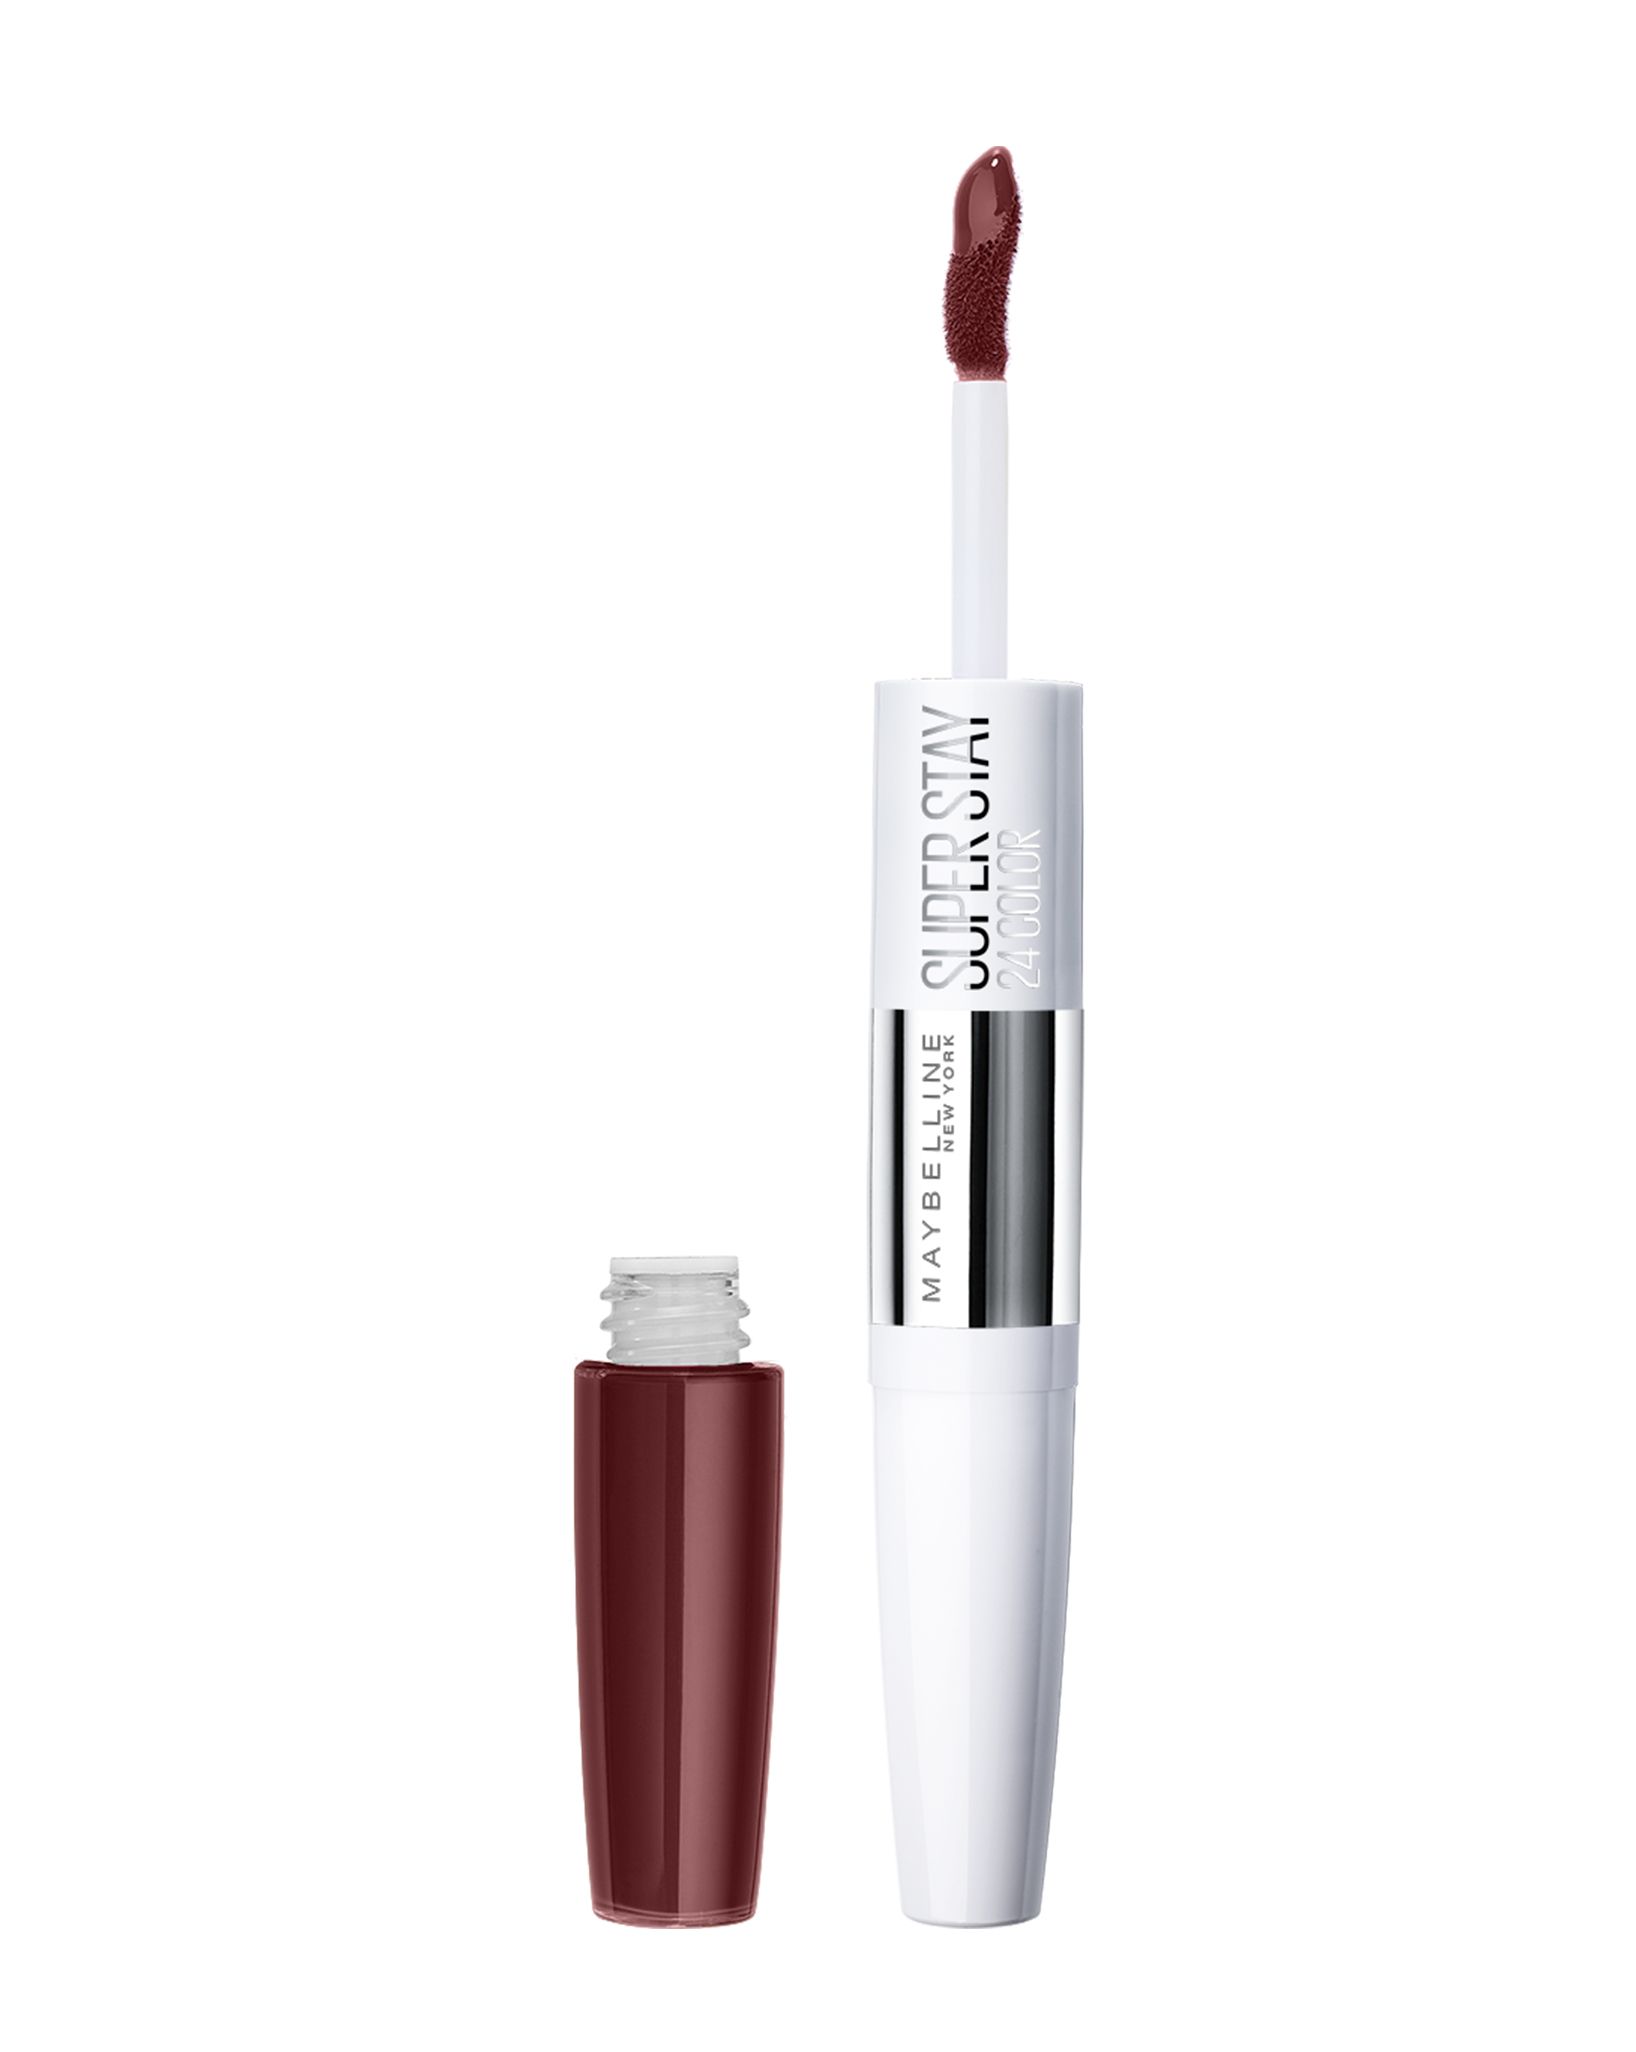 Labios Superstay 24H 760 MAYBELLINE, pack 1 unid.